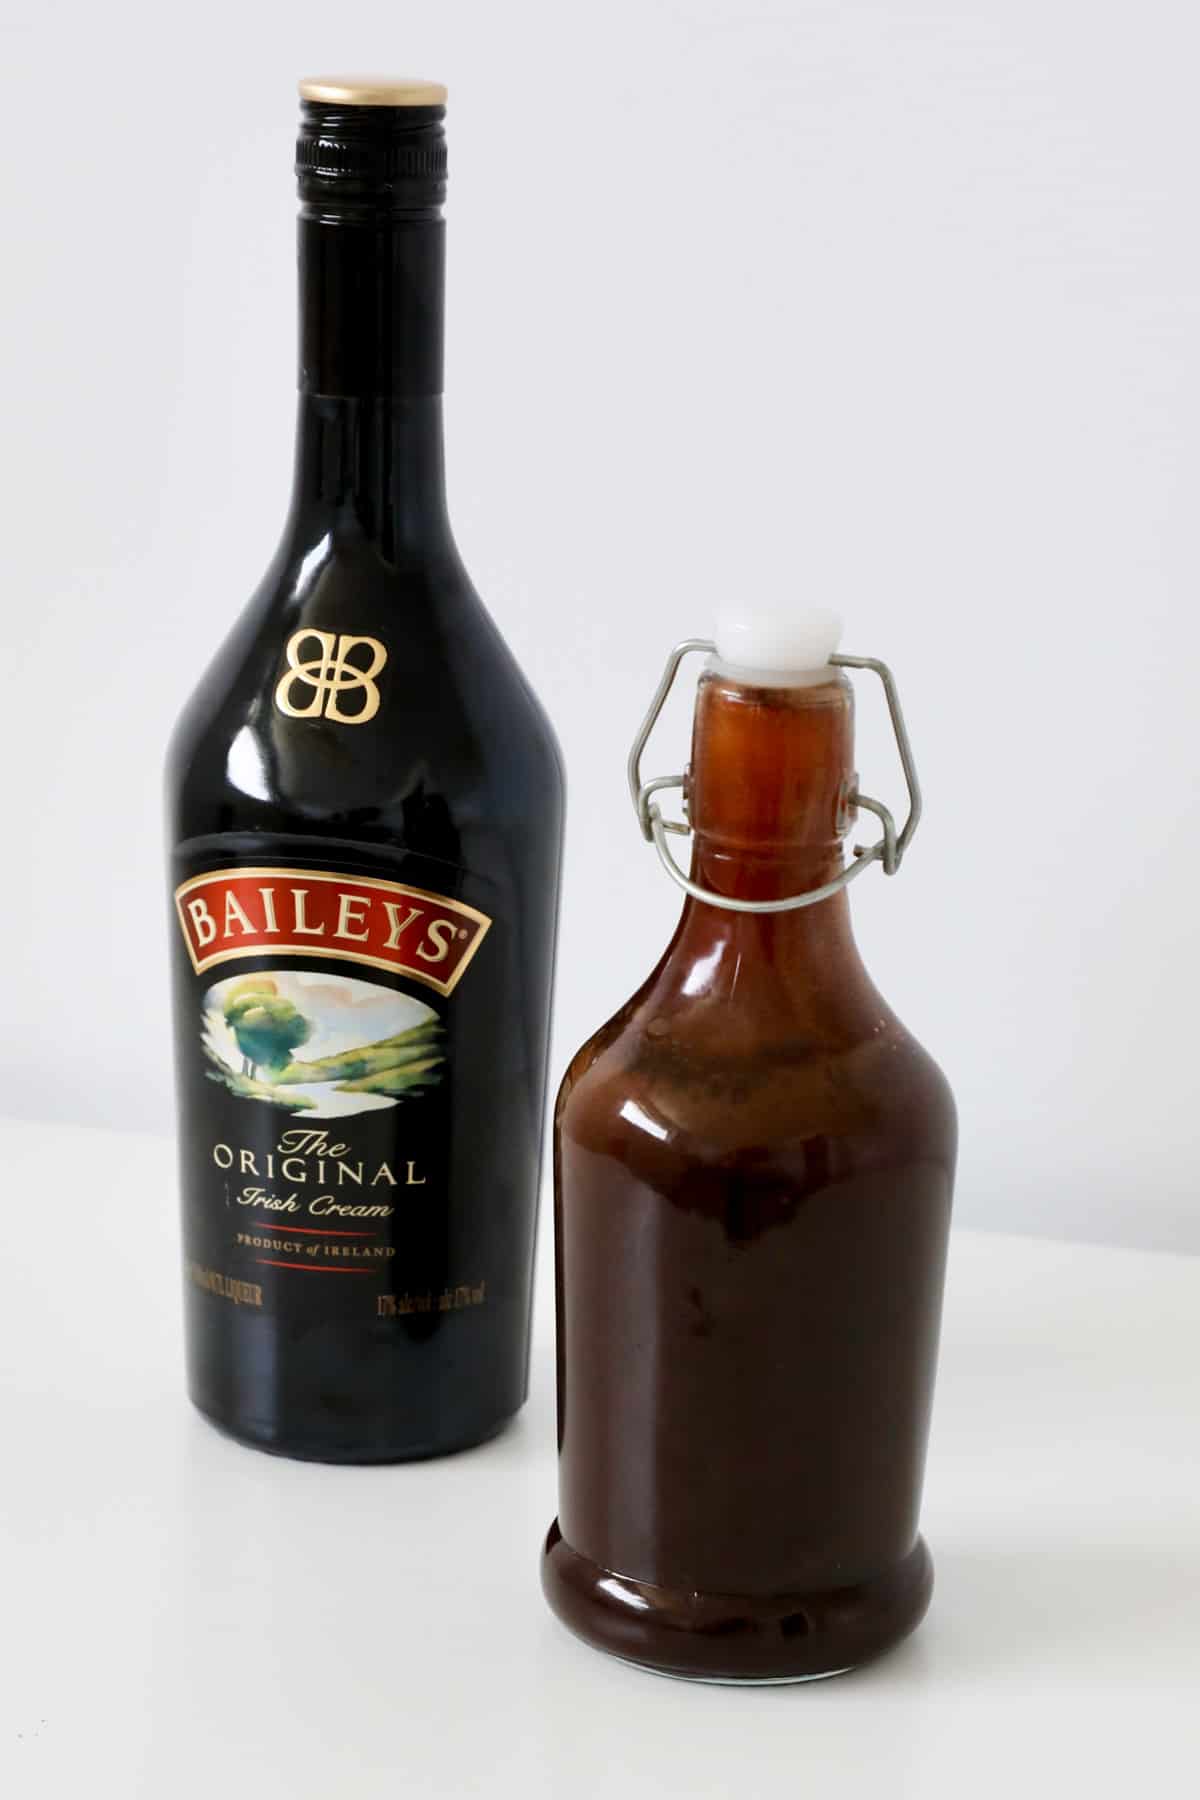 A glass of homemade chocolate sauce in front of a bottle of Baileys Irish cream.